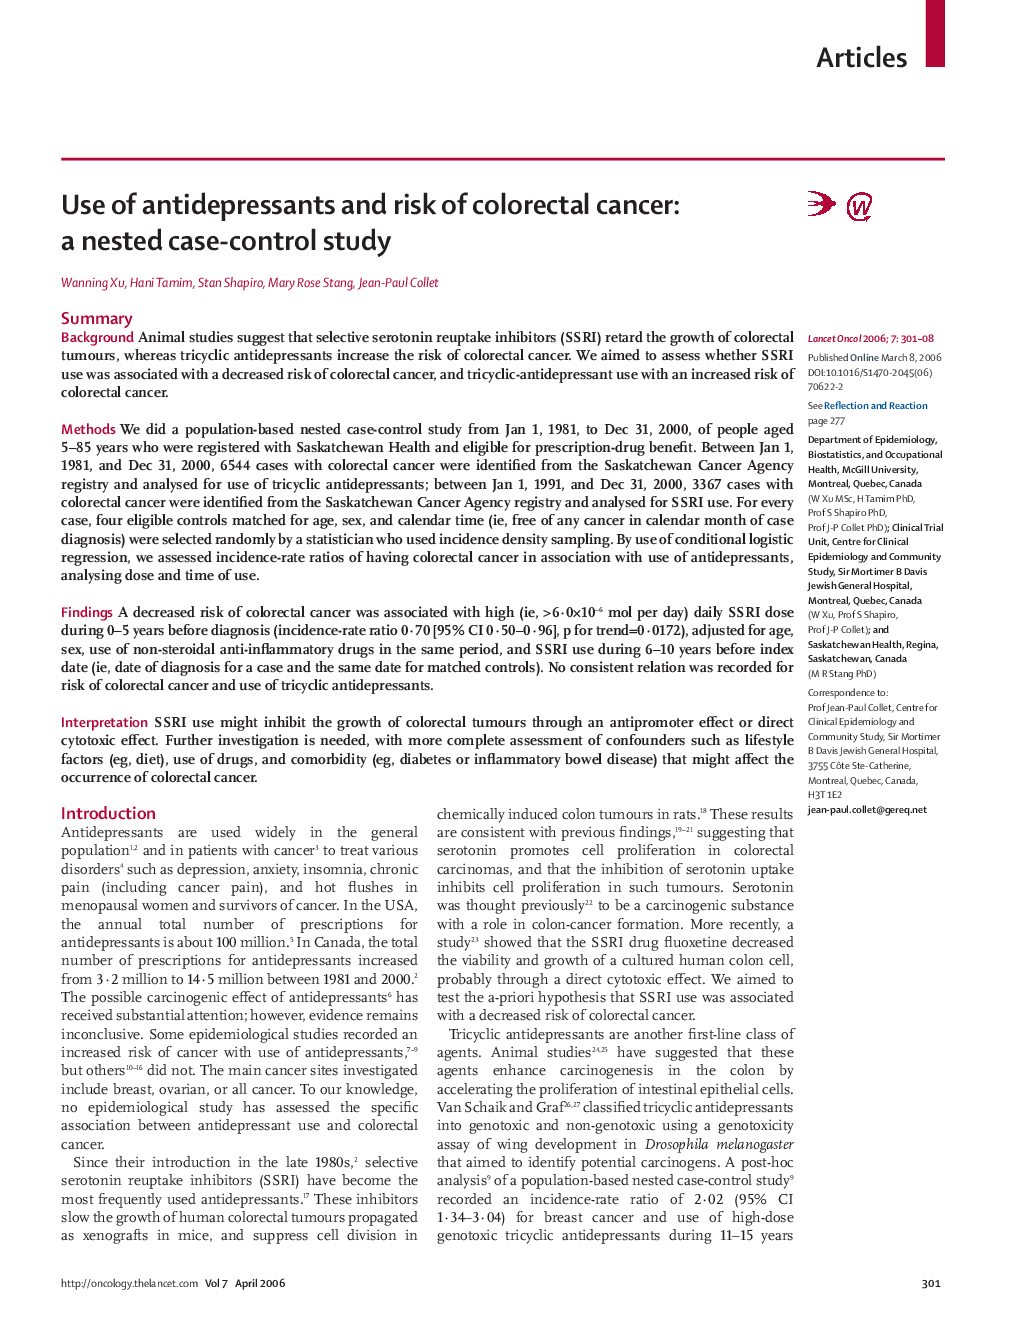 Use of antidepressants and risk of colorectal cancer: a nested case-control study